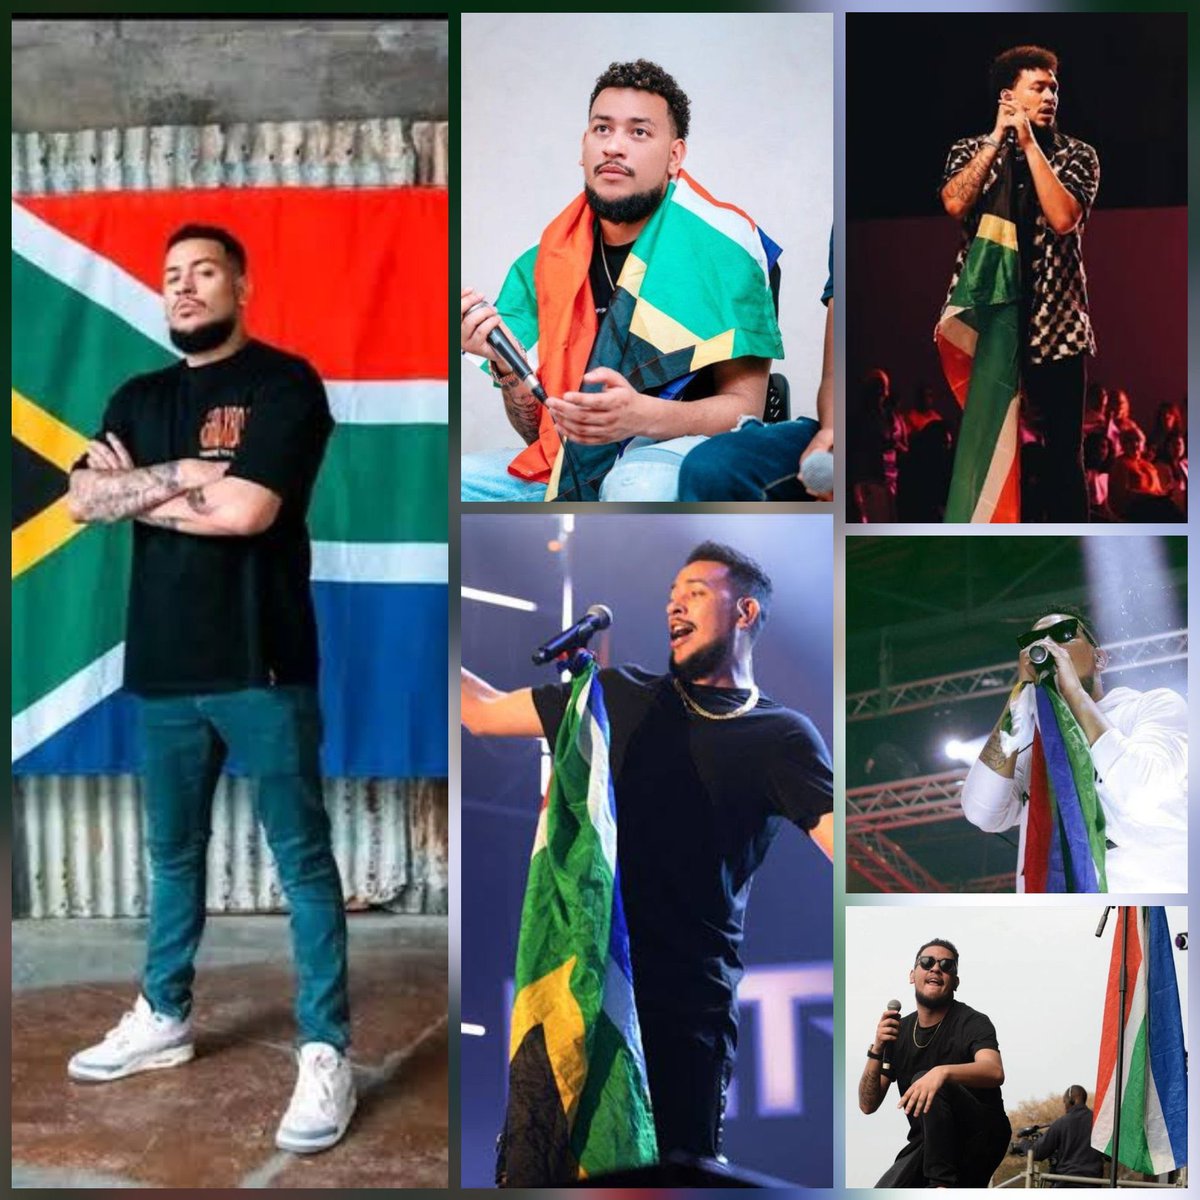 None other artist has ever represented and protected South Africa as you did. You were our Ambassador, Public Protector and Mr President. It was an honor to be your Stan. You have made your mark and left a legacy. 💜

Long Live Supa Mega Live Long. 🙏🏽

#RIPAKA
#JusticeForAKA